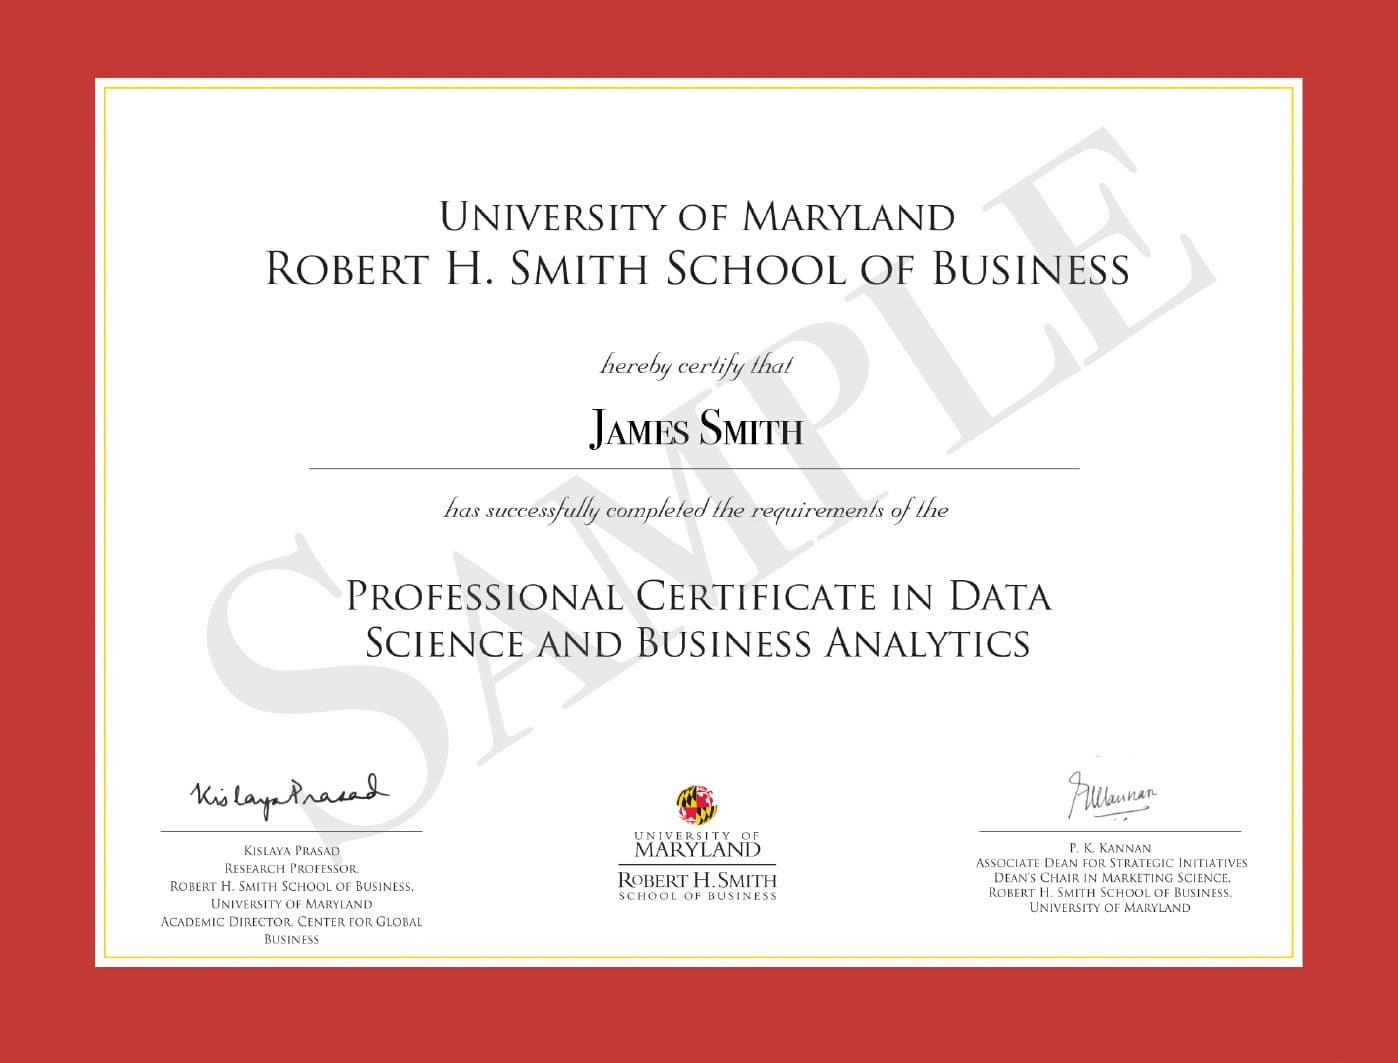 Upon successful completion of the Program, you receive a verified certificate from University of Maryland's Robert H. Smith School of Business